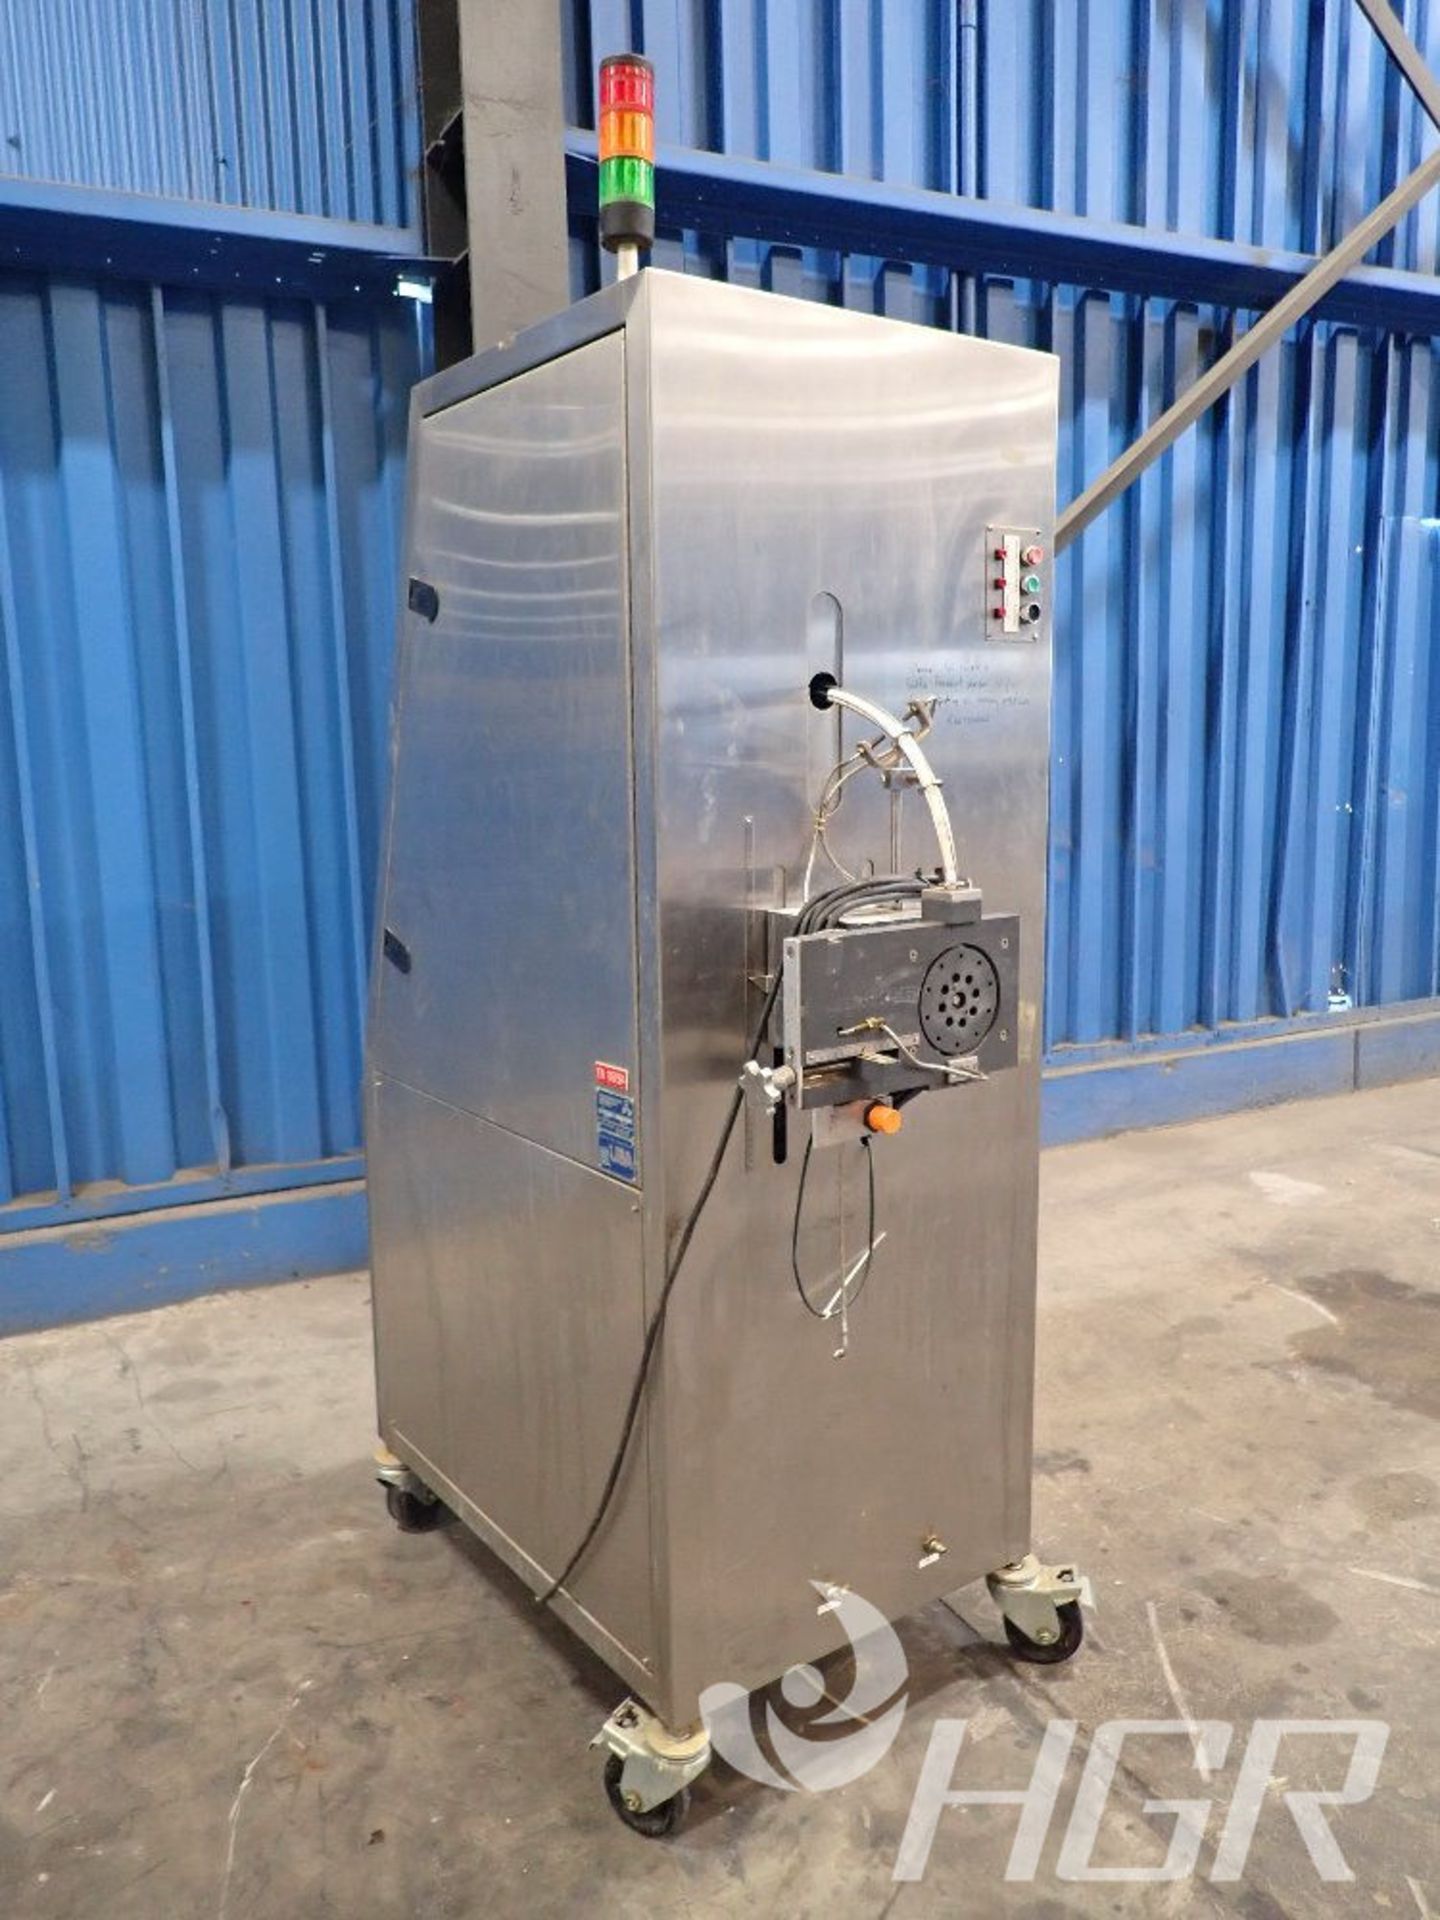 PACE PACKING CORP DESSICANT DISPENSER, Model DESC-3000, Date: n/a; s/n 1258, Approx. Capacity: n/